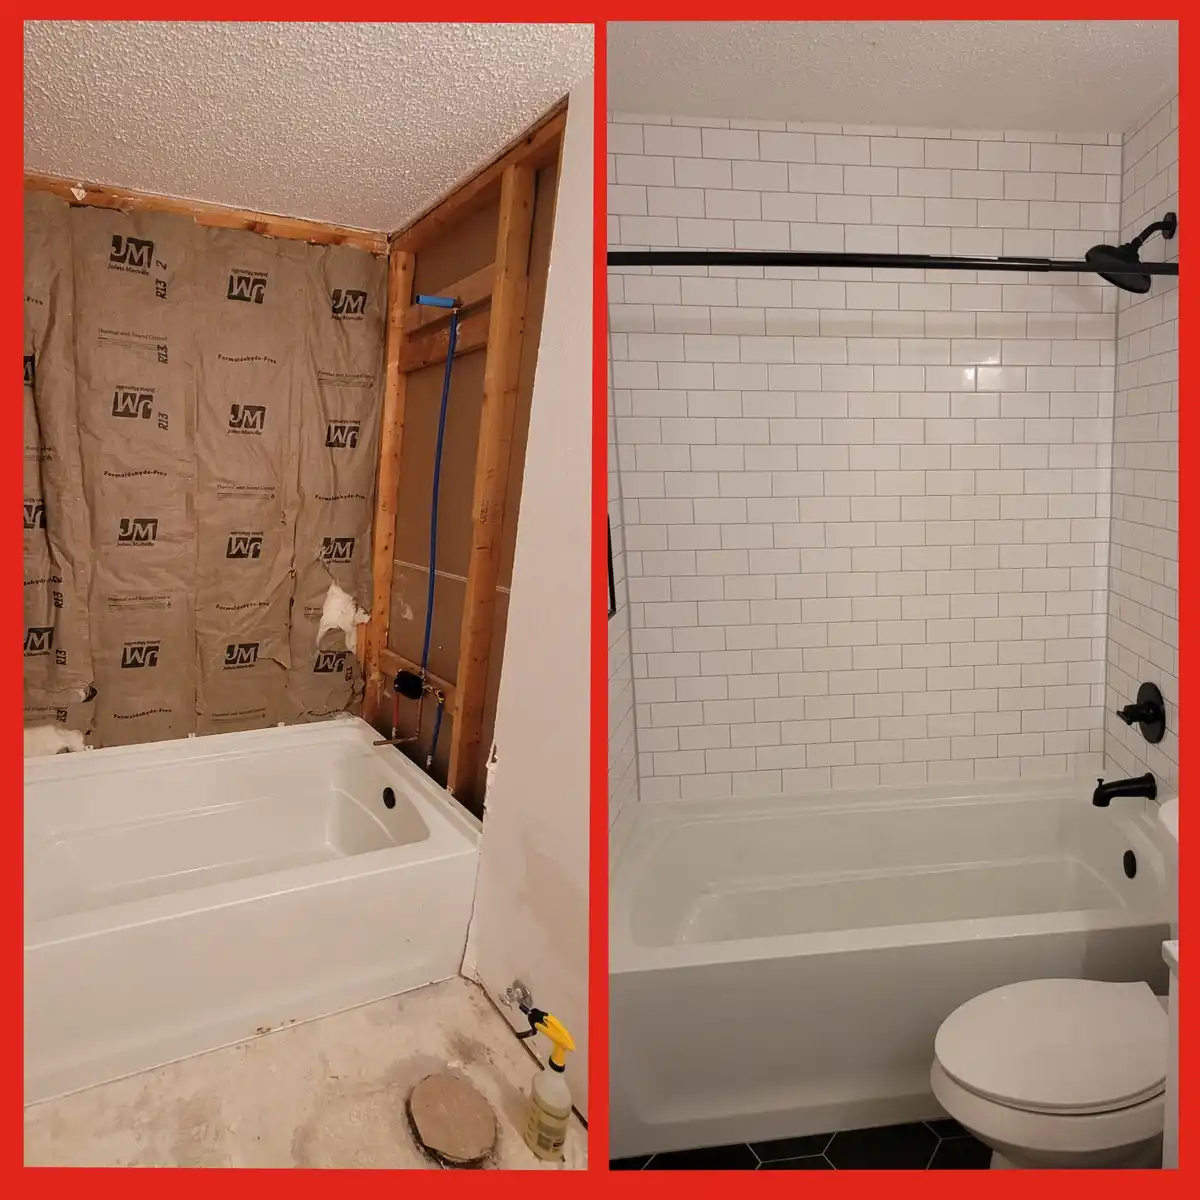 Before and after photos showing bathroom remodel performed by Mr. Handyman in South Fort Worth home